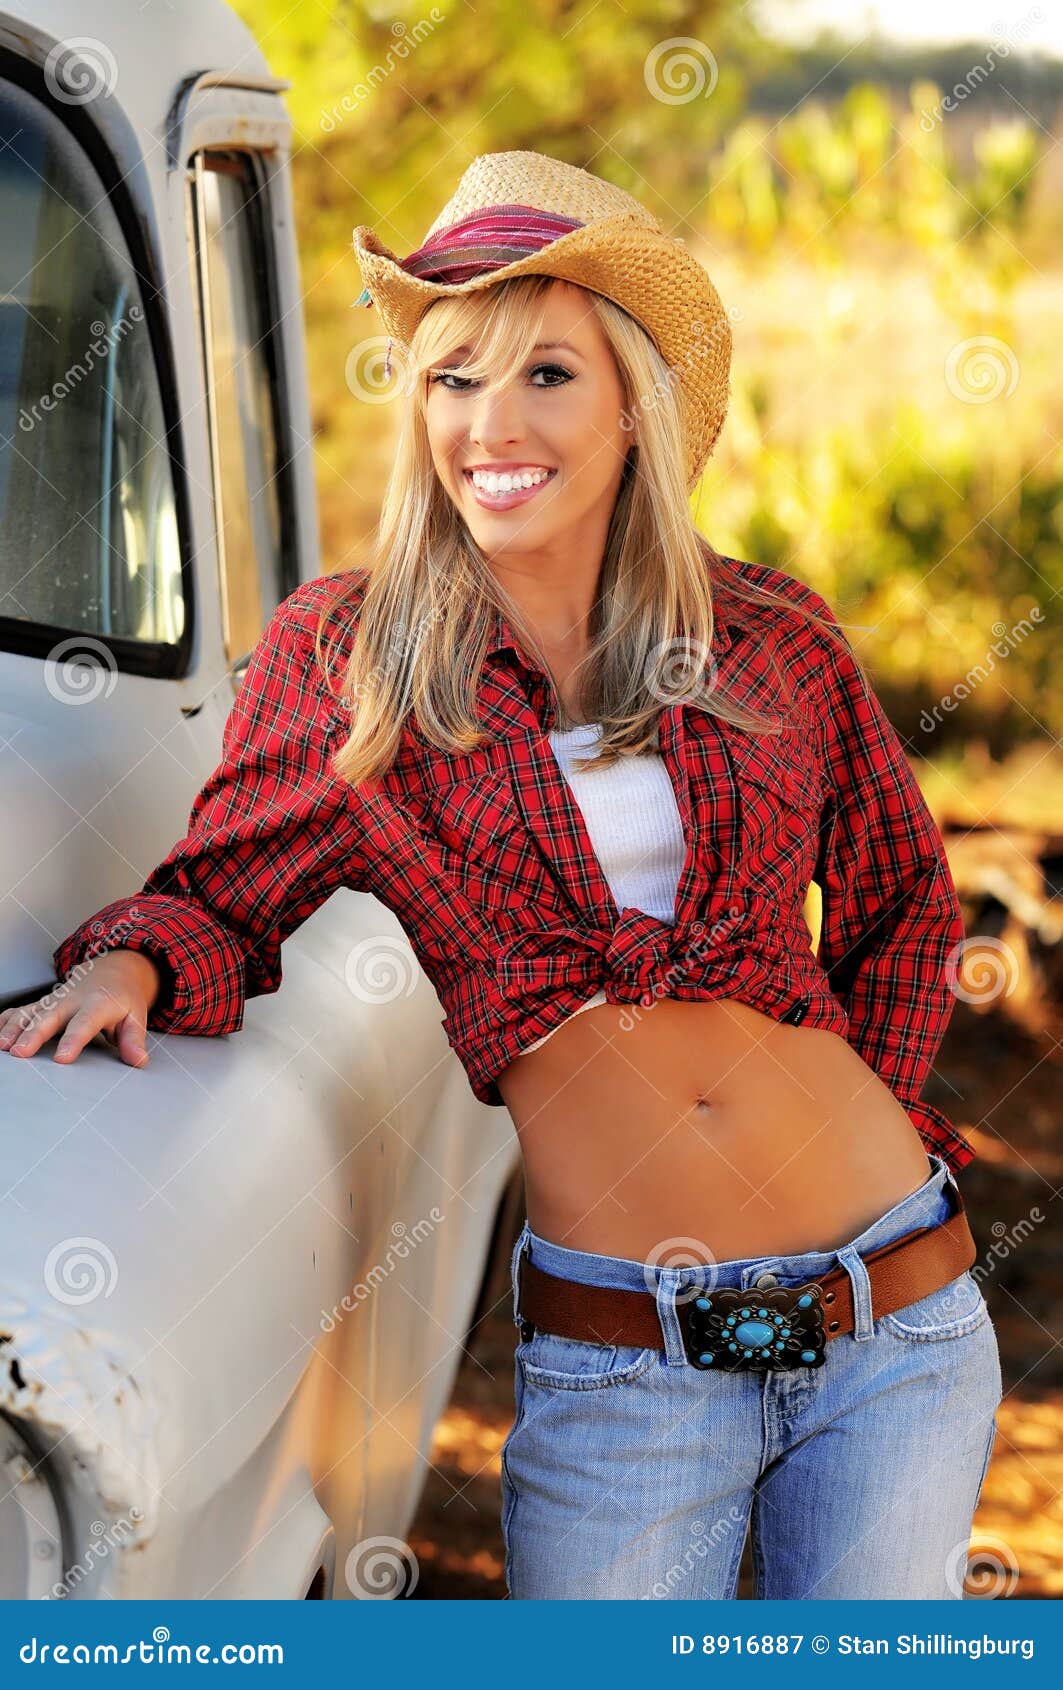 Only a country girl